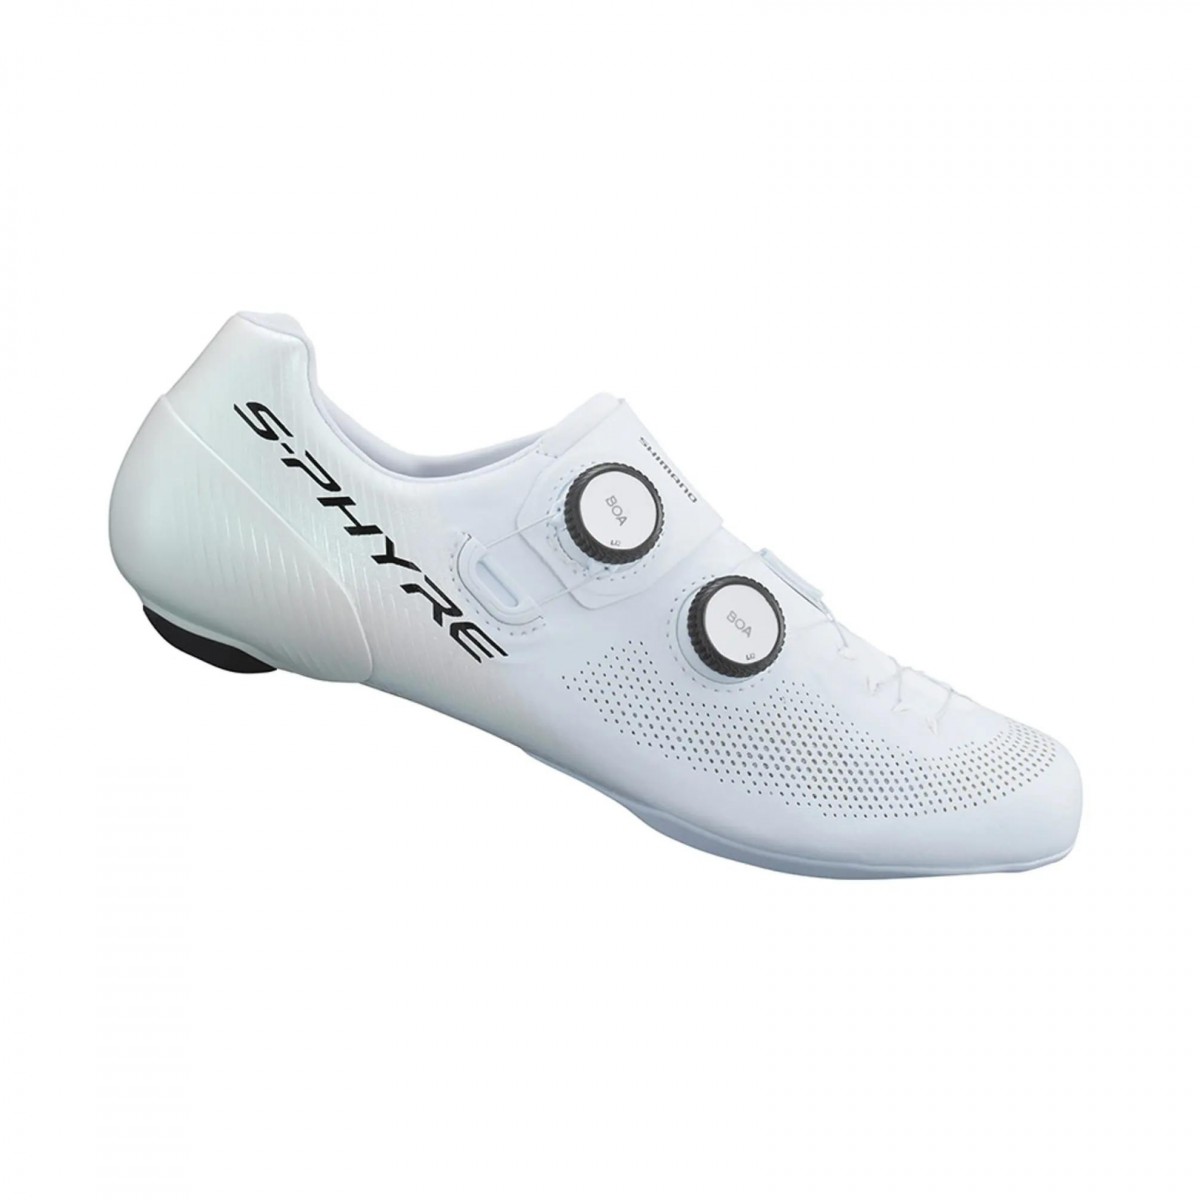 Chaussures Shimano RC903 S-PHYRE blanches